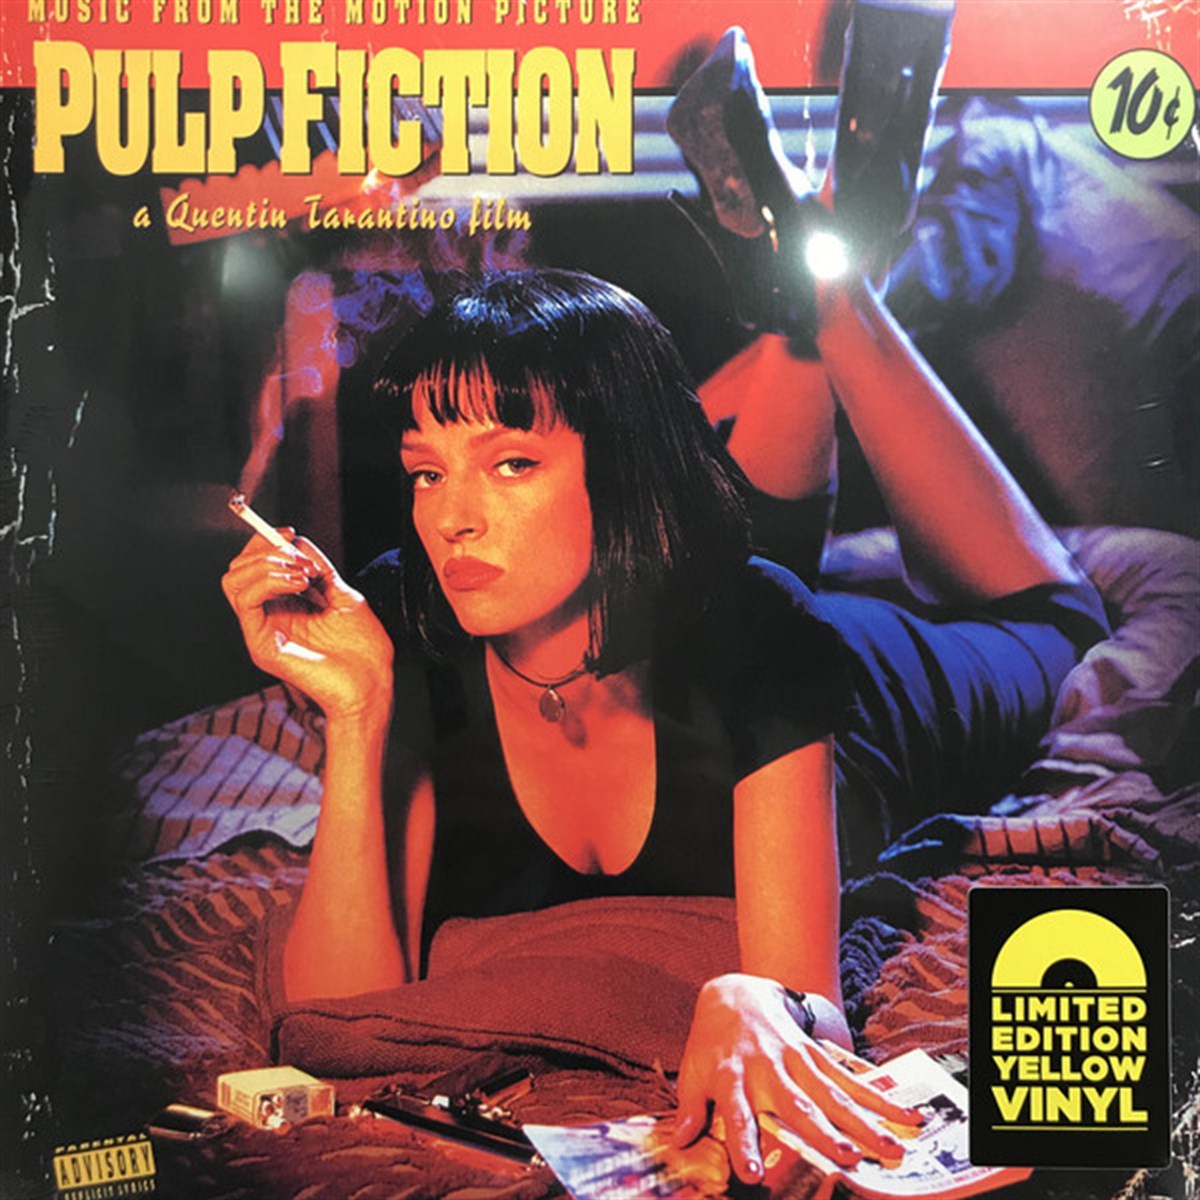 VARIOUS PULP FICTION MUSIC FROM THE MOTION PICTURE